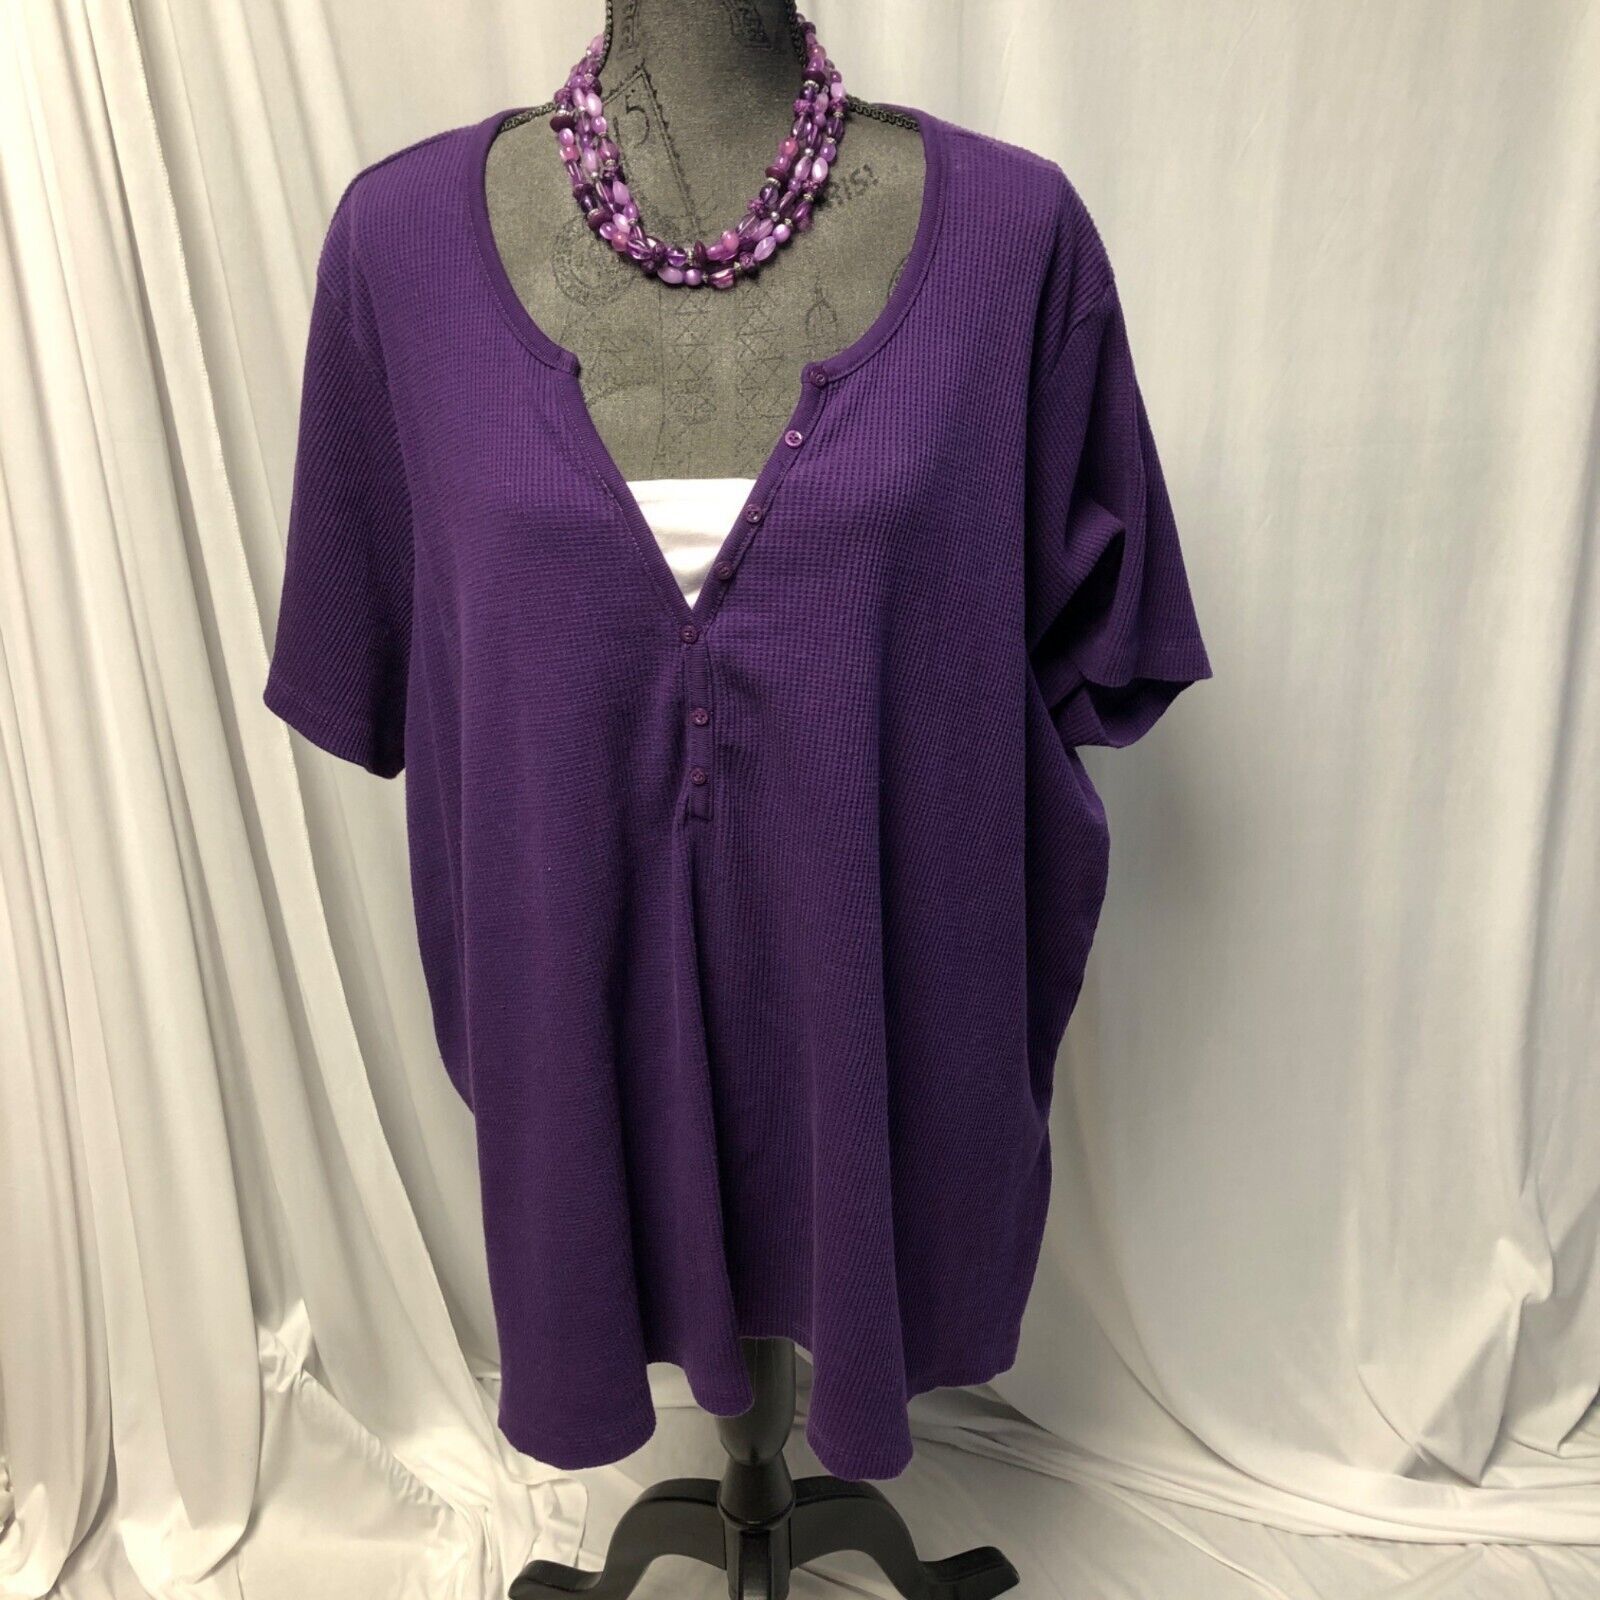 Primary image for Woman Within Top Womens 4X 34-36 Waffle Weave Purple Shirt